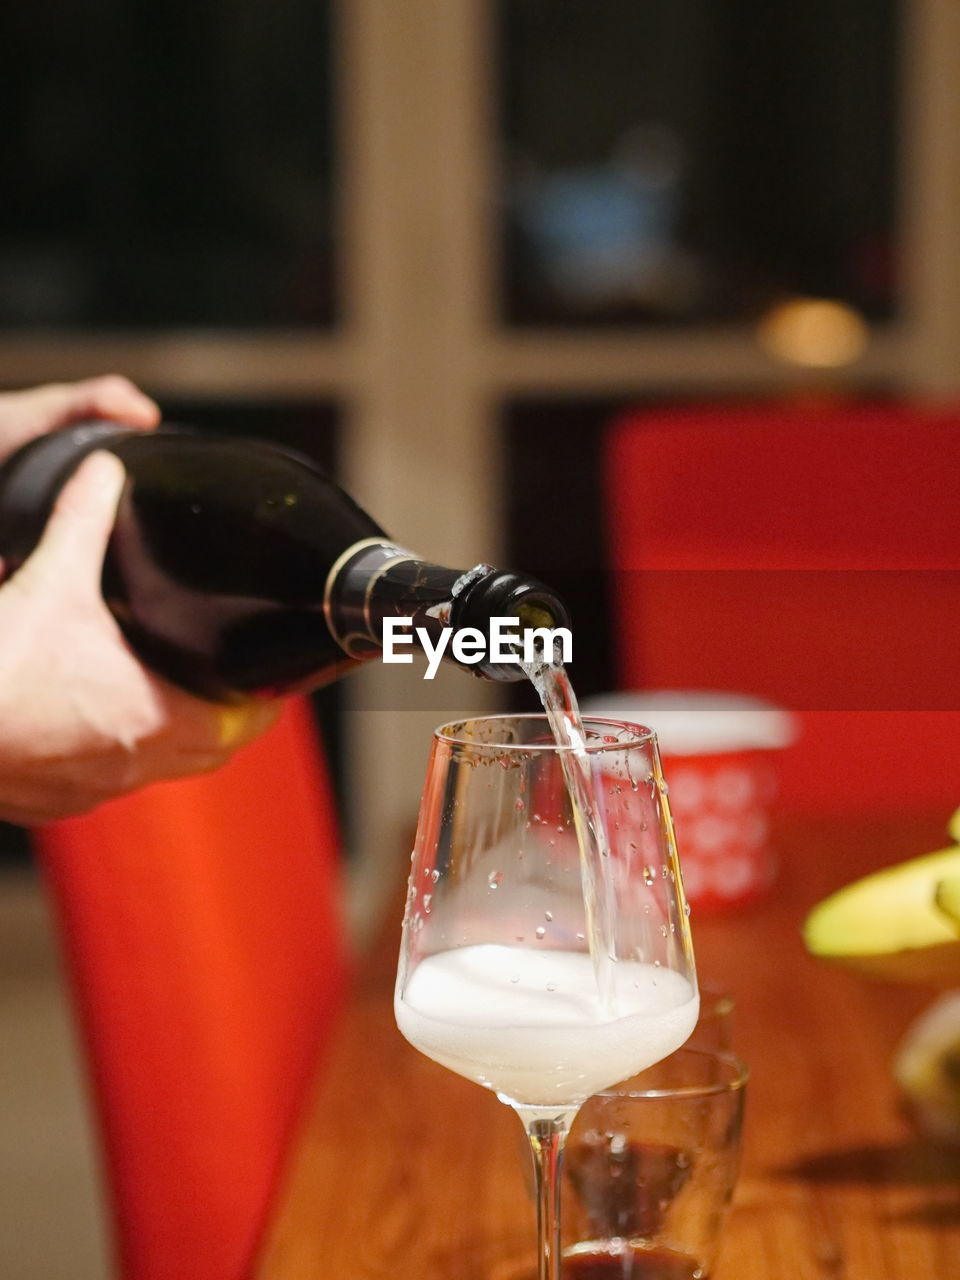 Cropped image of hands pouring wine in glass on table